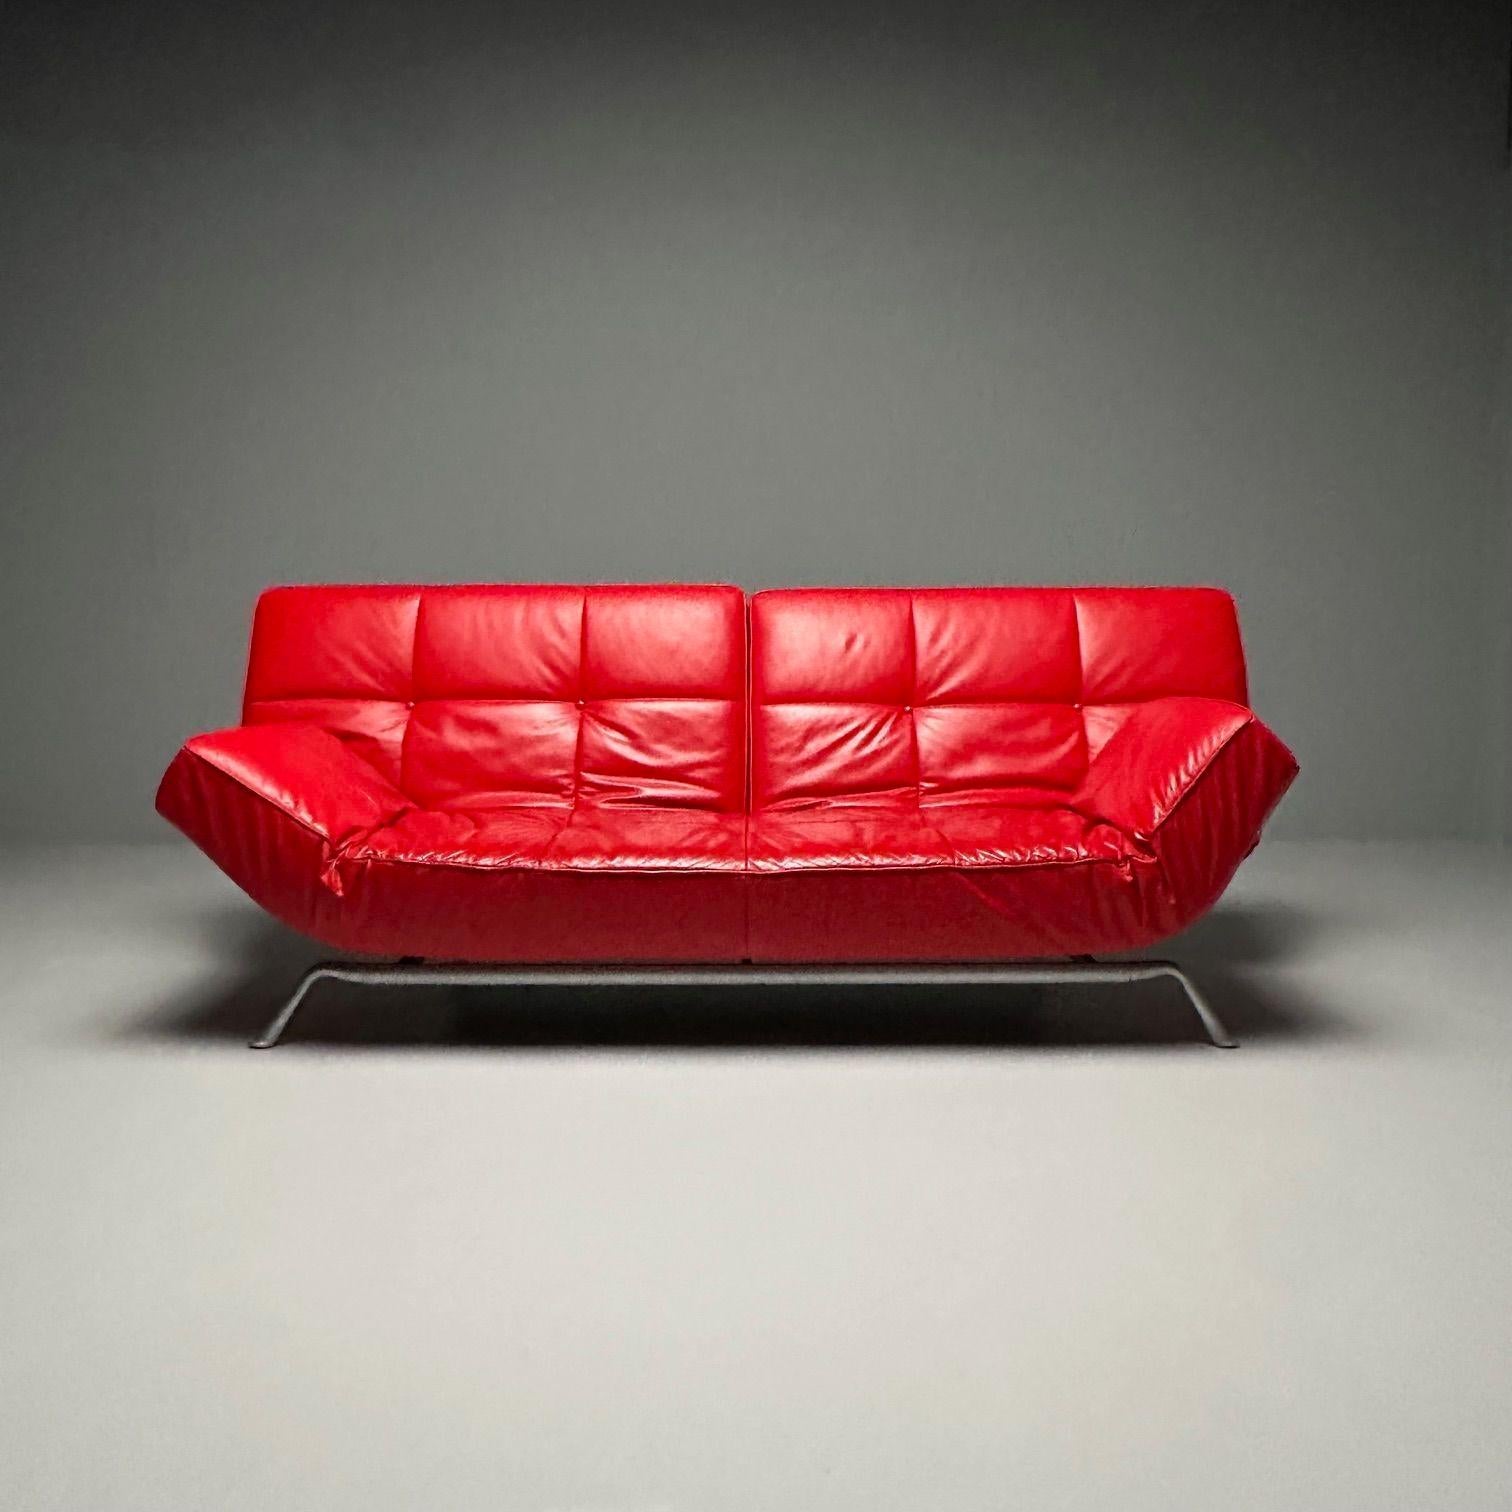 French Pascal Mourgue, Ligne Roset, Smala Adjustable Daybed, Sofa, Red Leather, France